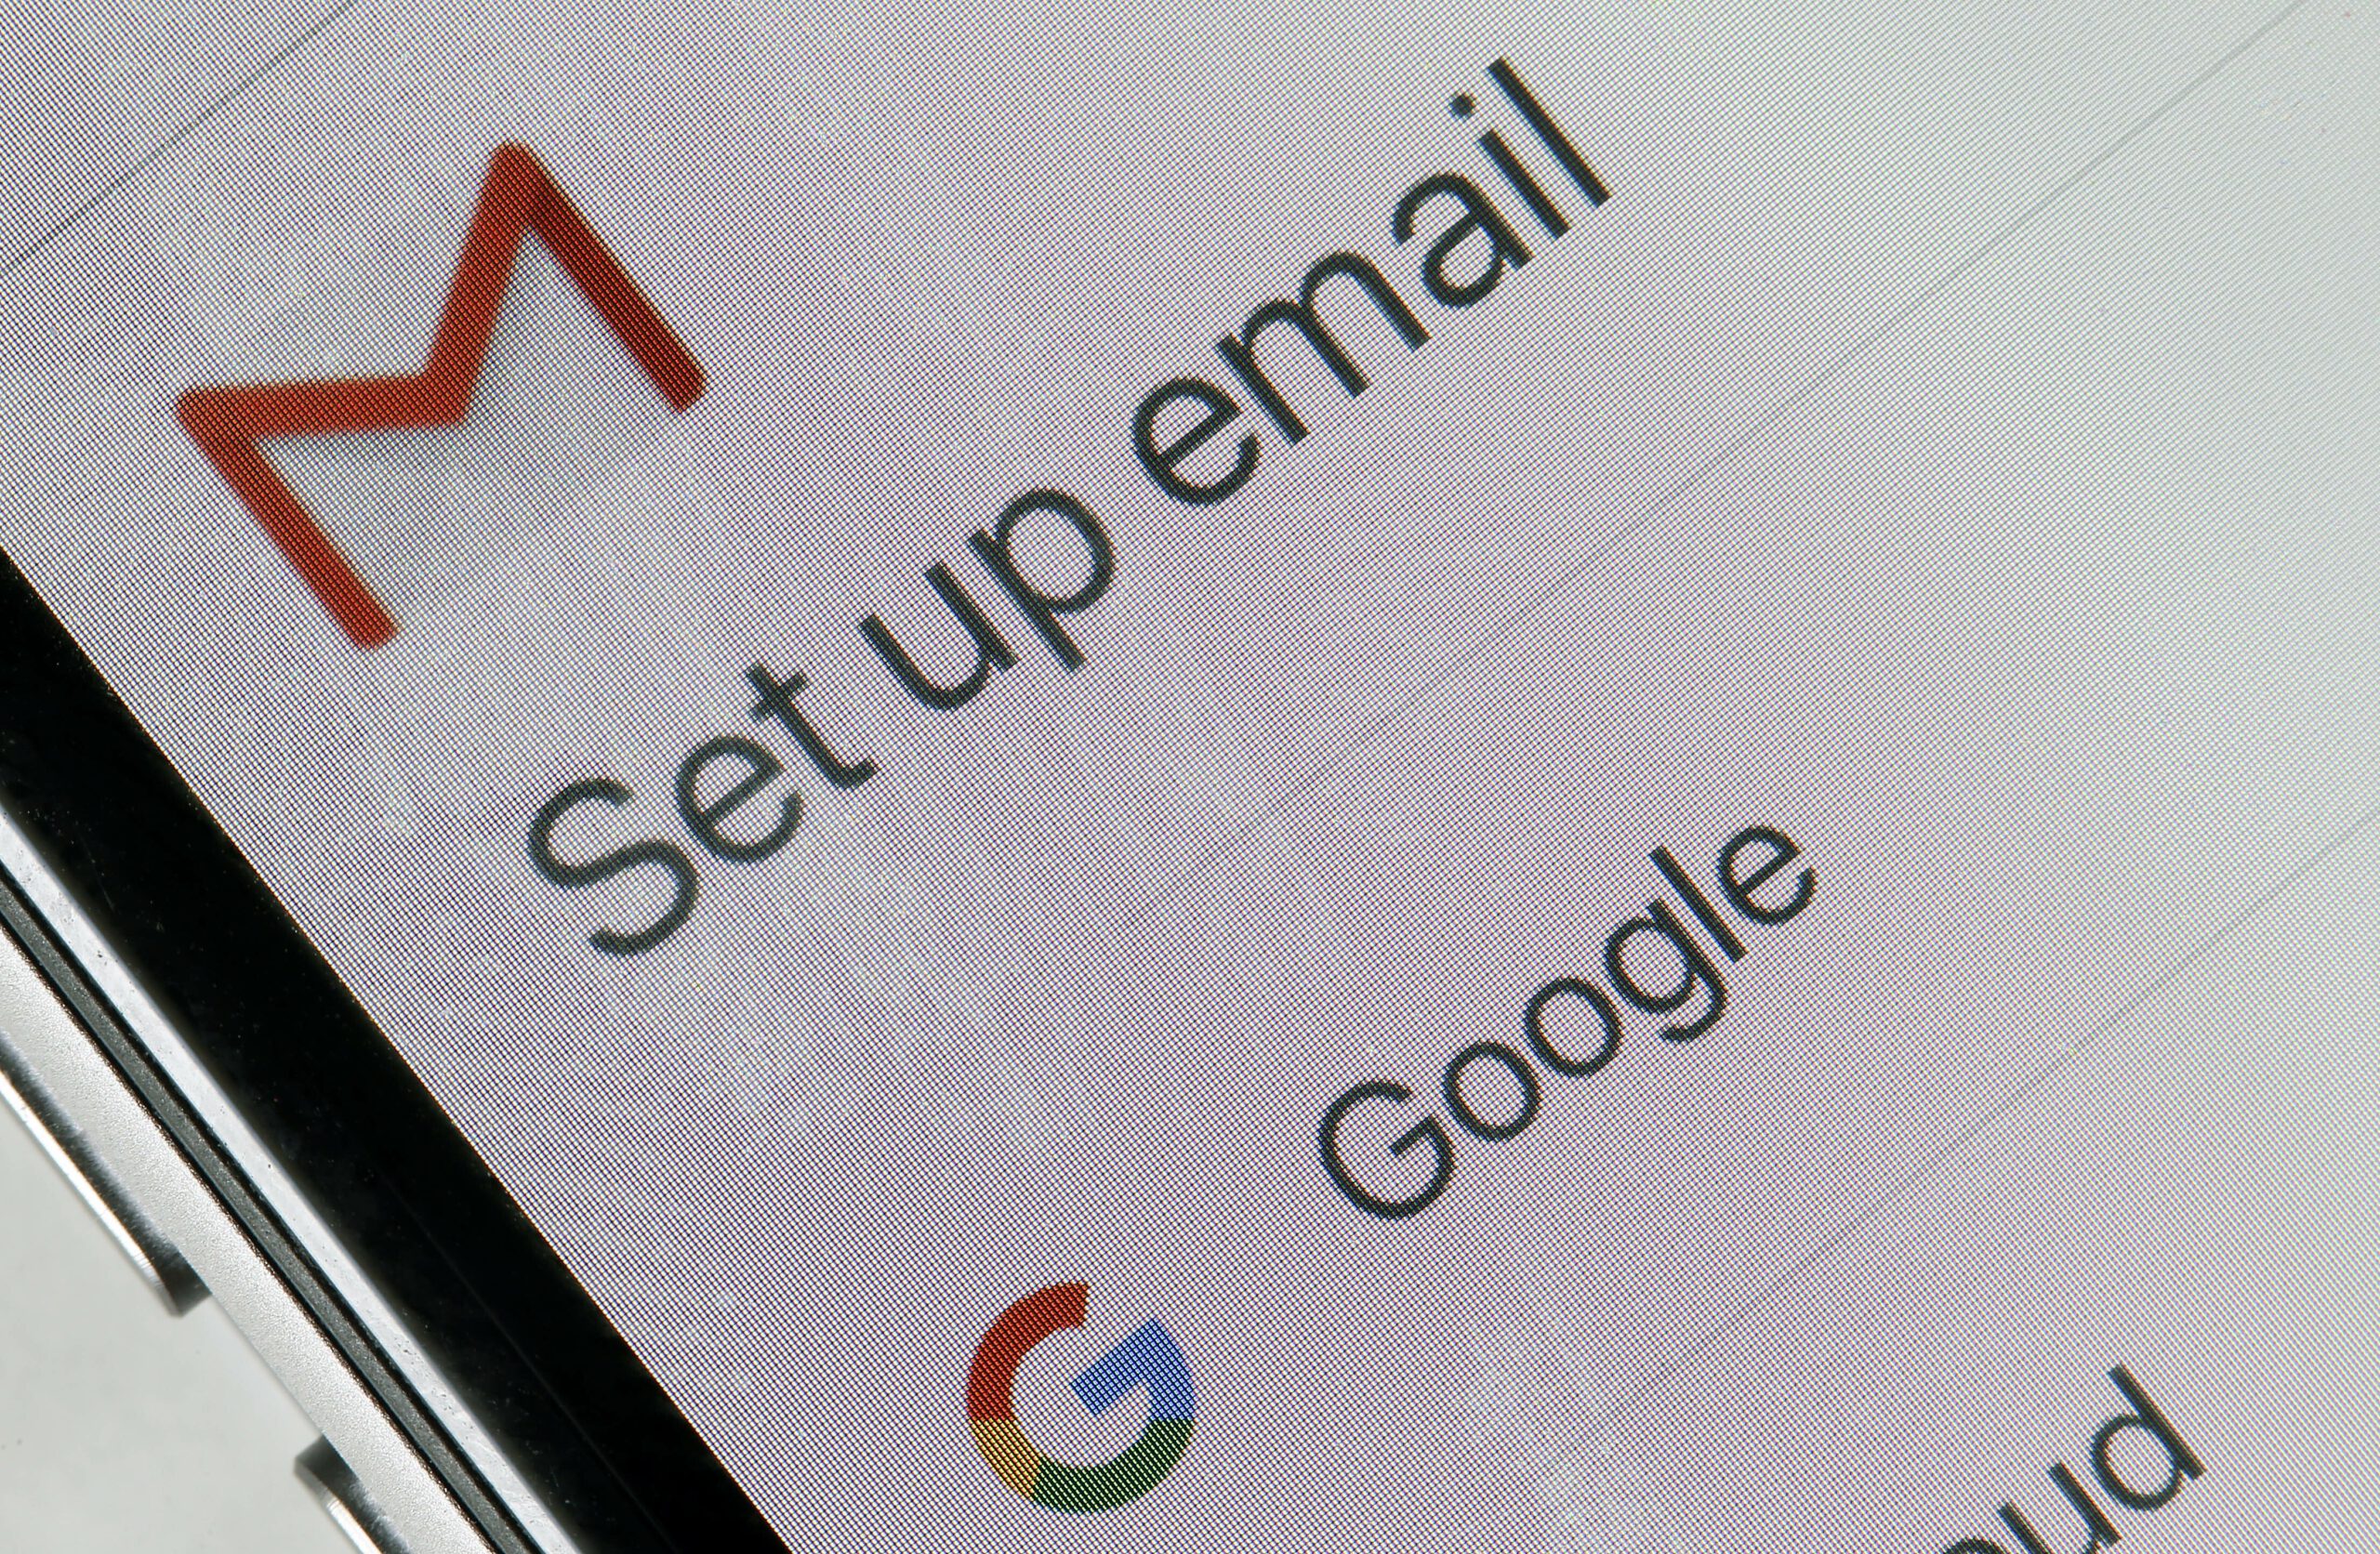 logos of the Gmail and google are seen on the screen of an iPhone